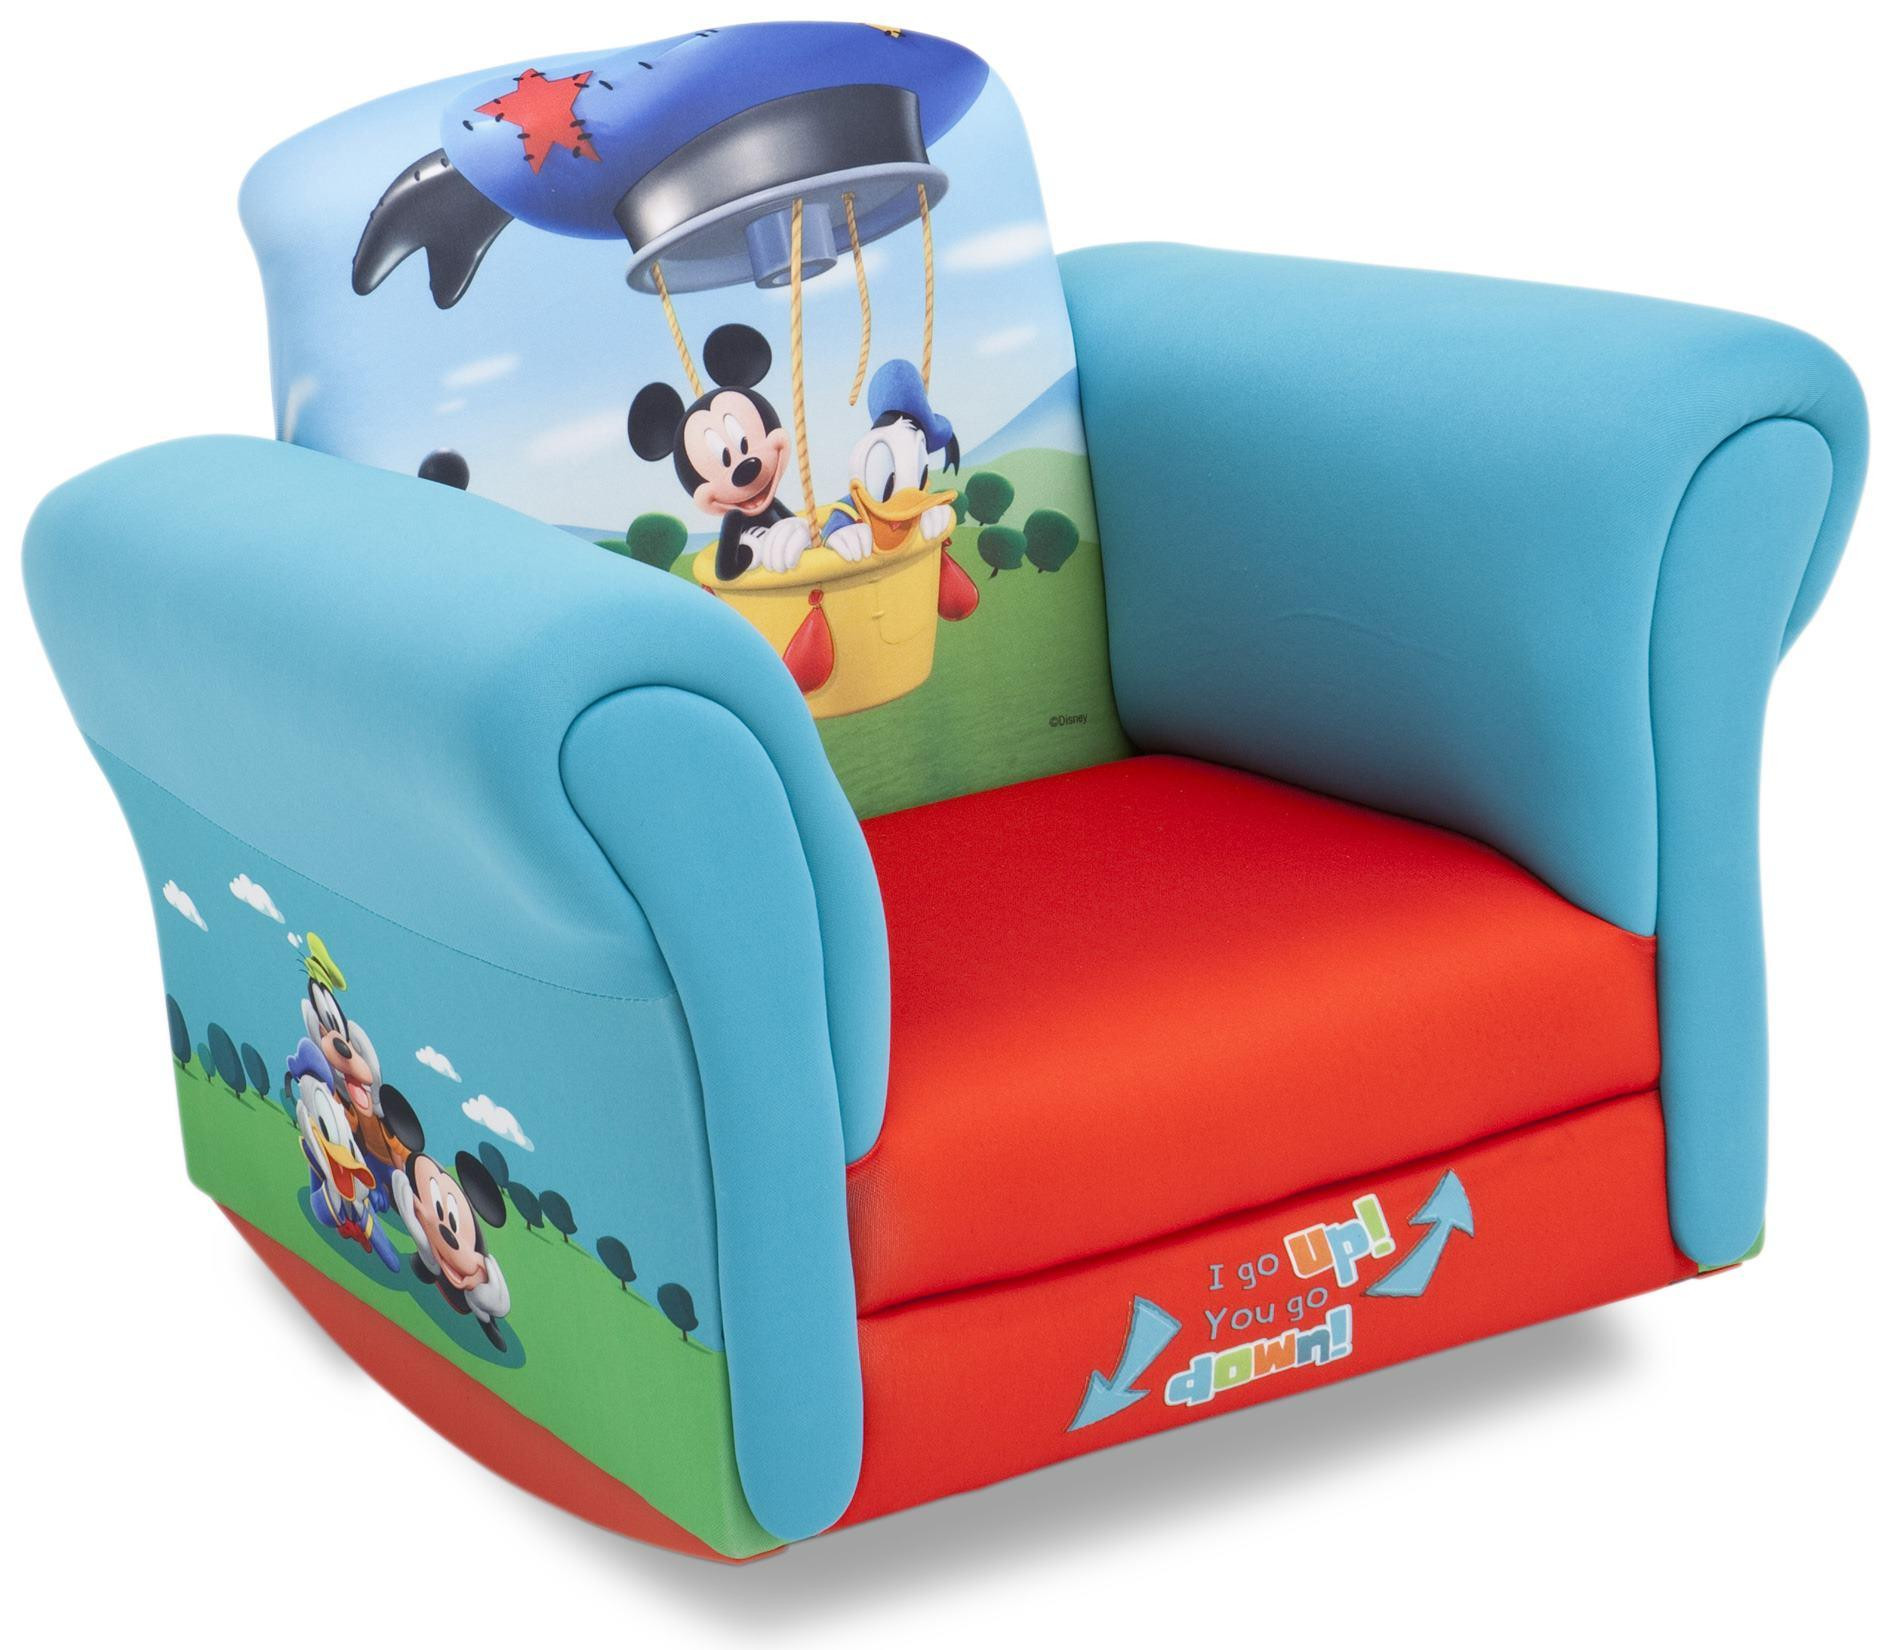 Kids Upholstered Rocking Chair
 Delta Upholstered Child s Mickey Mouse Rocking Chair Kmart